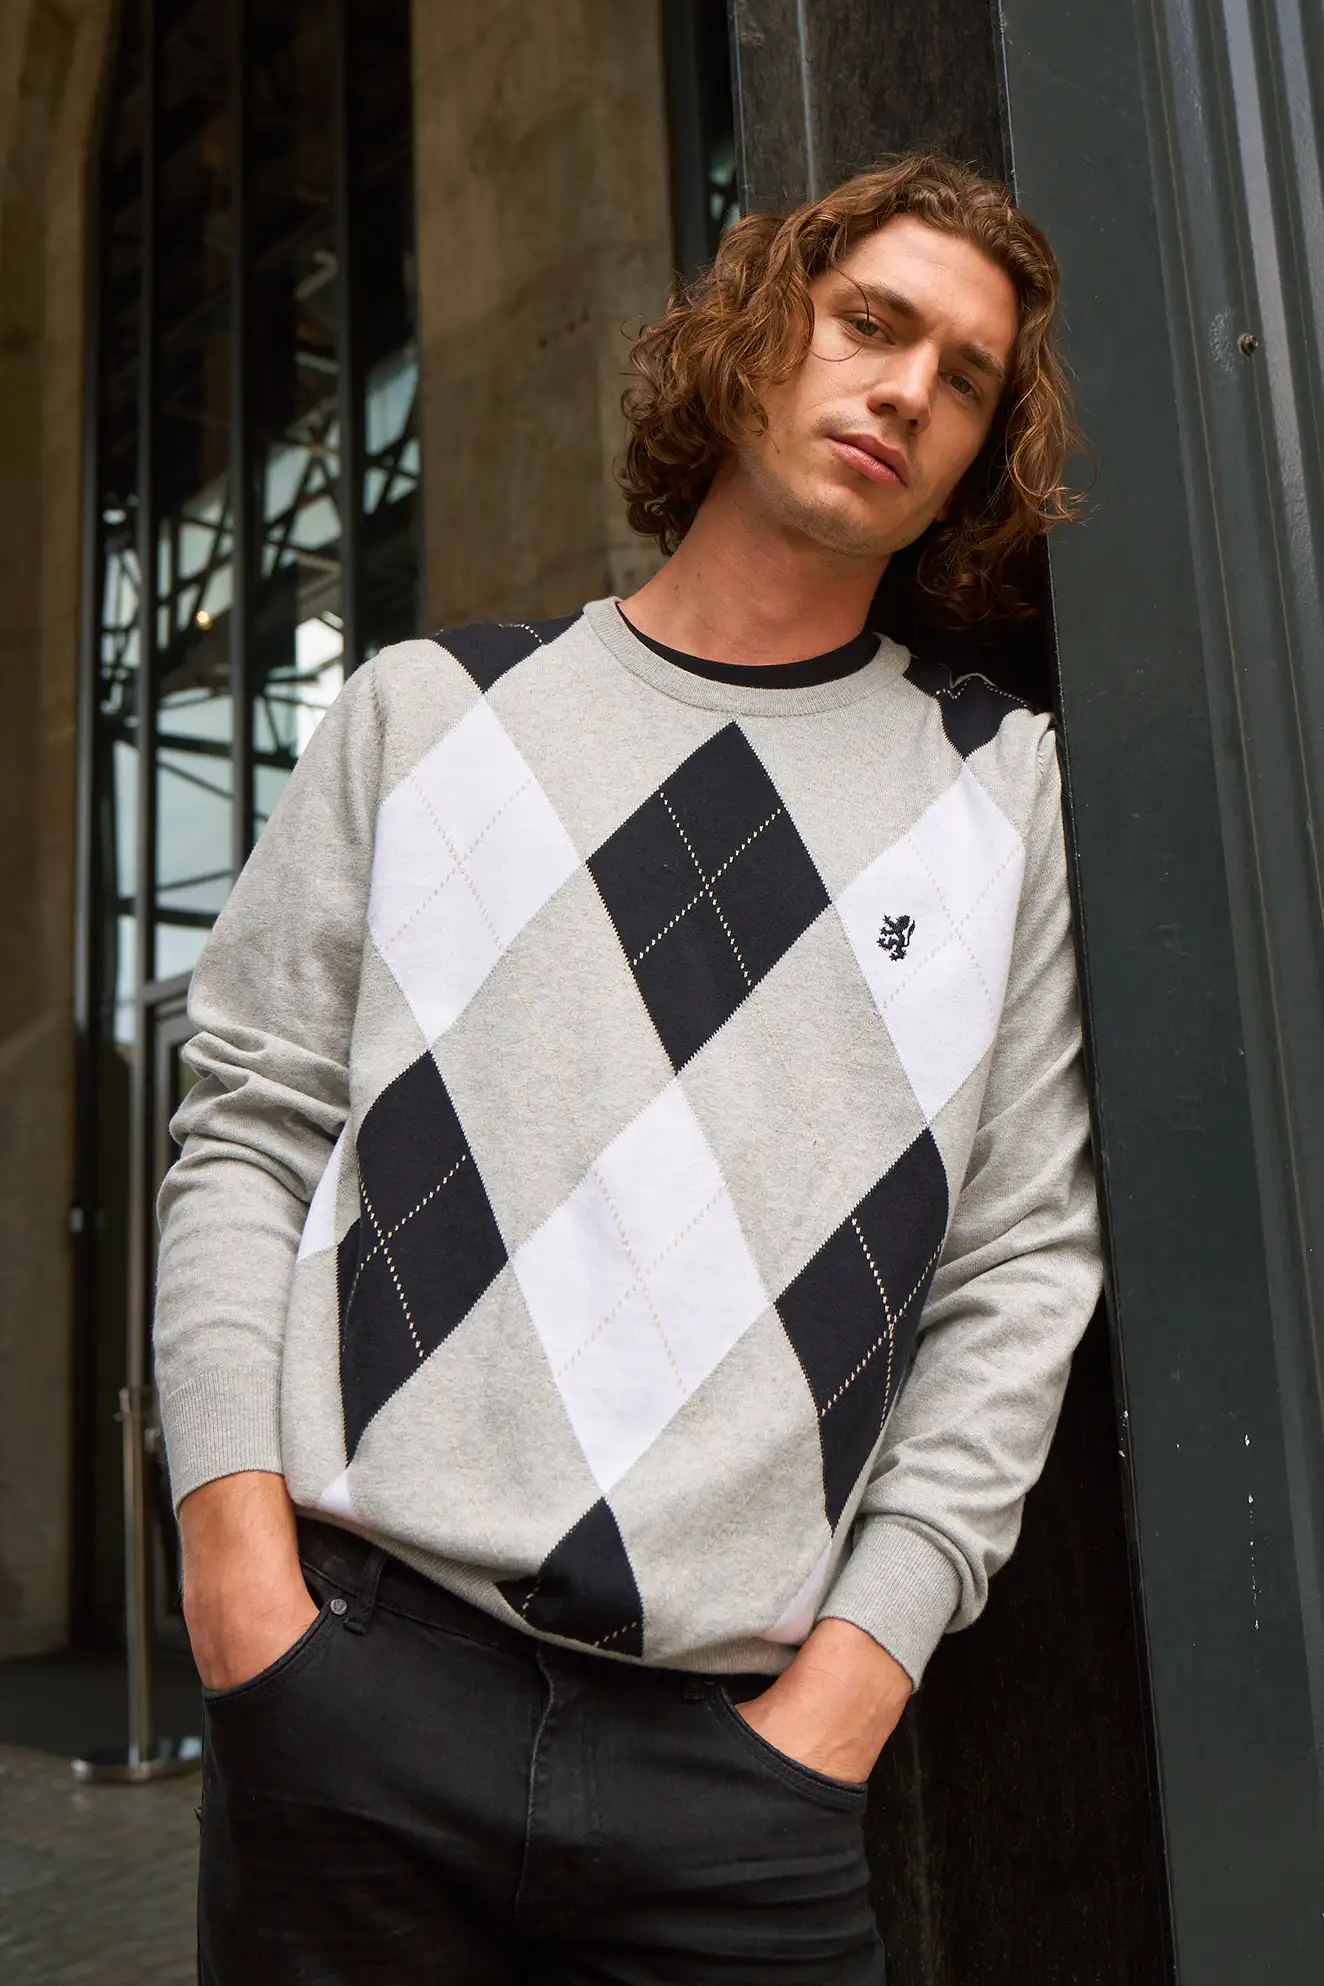 Argyle sweaters, diamond patterned sweaters are a classic yet stylish addition to any wardrobe. They offer a touch of sophistication and visual interest